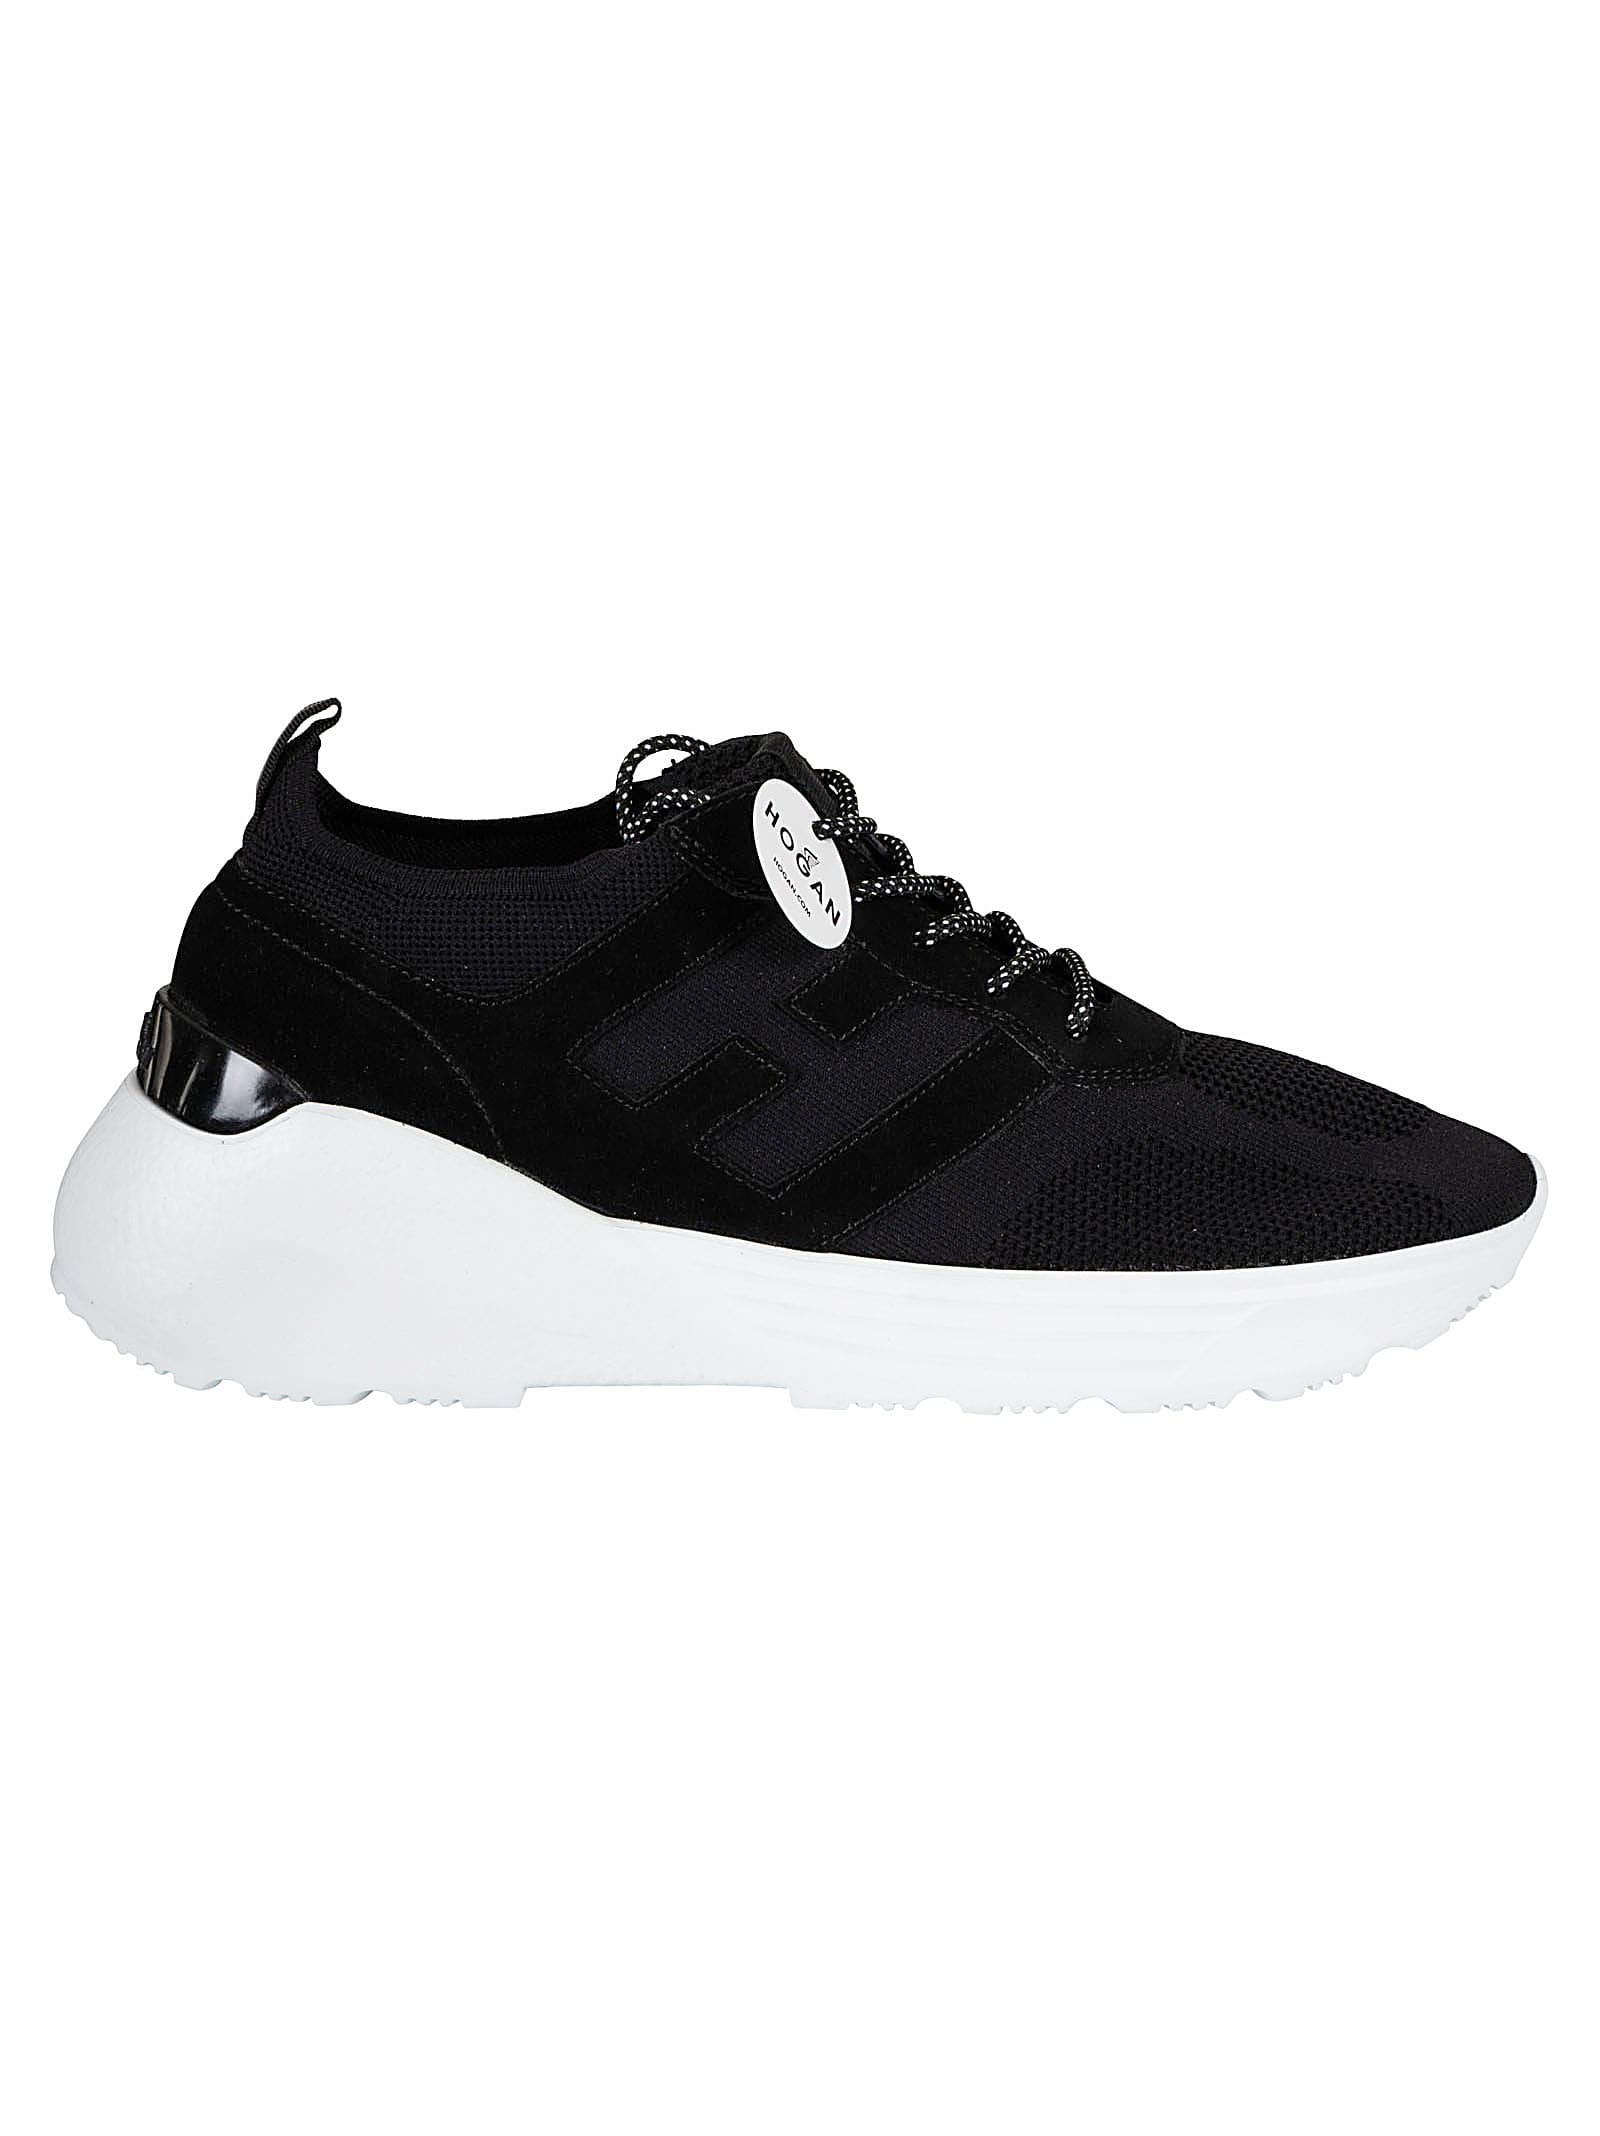 Hogan Active One Knit Sneakers